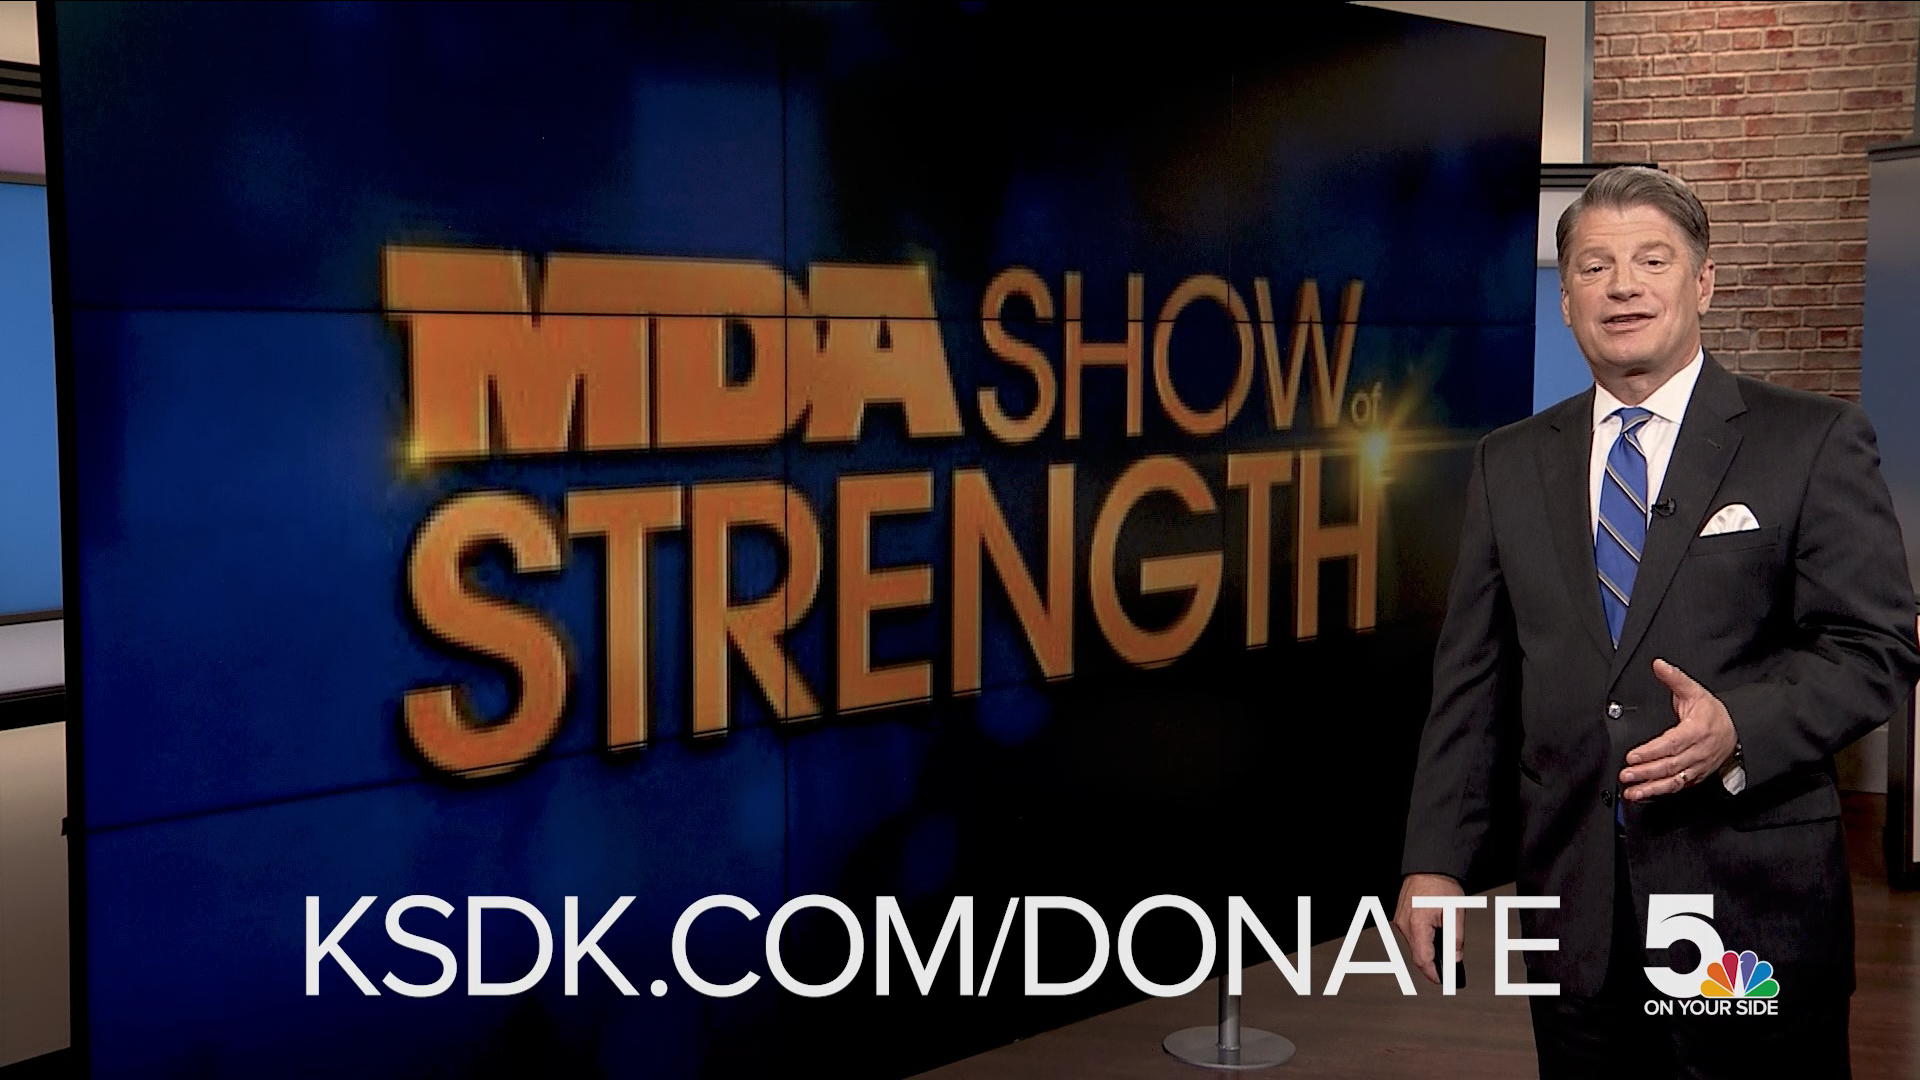 KSDK is hosting the MDA fundraiser to help people with neuromuscular diseases living in the St. Louis community. Text GiveMDA to 314-425-5355